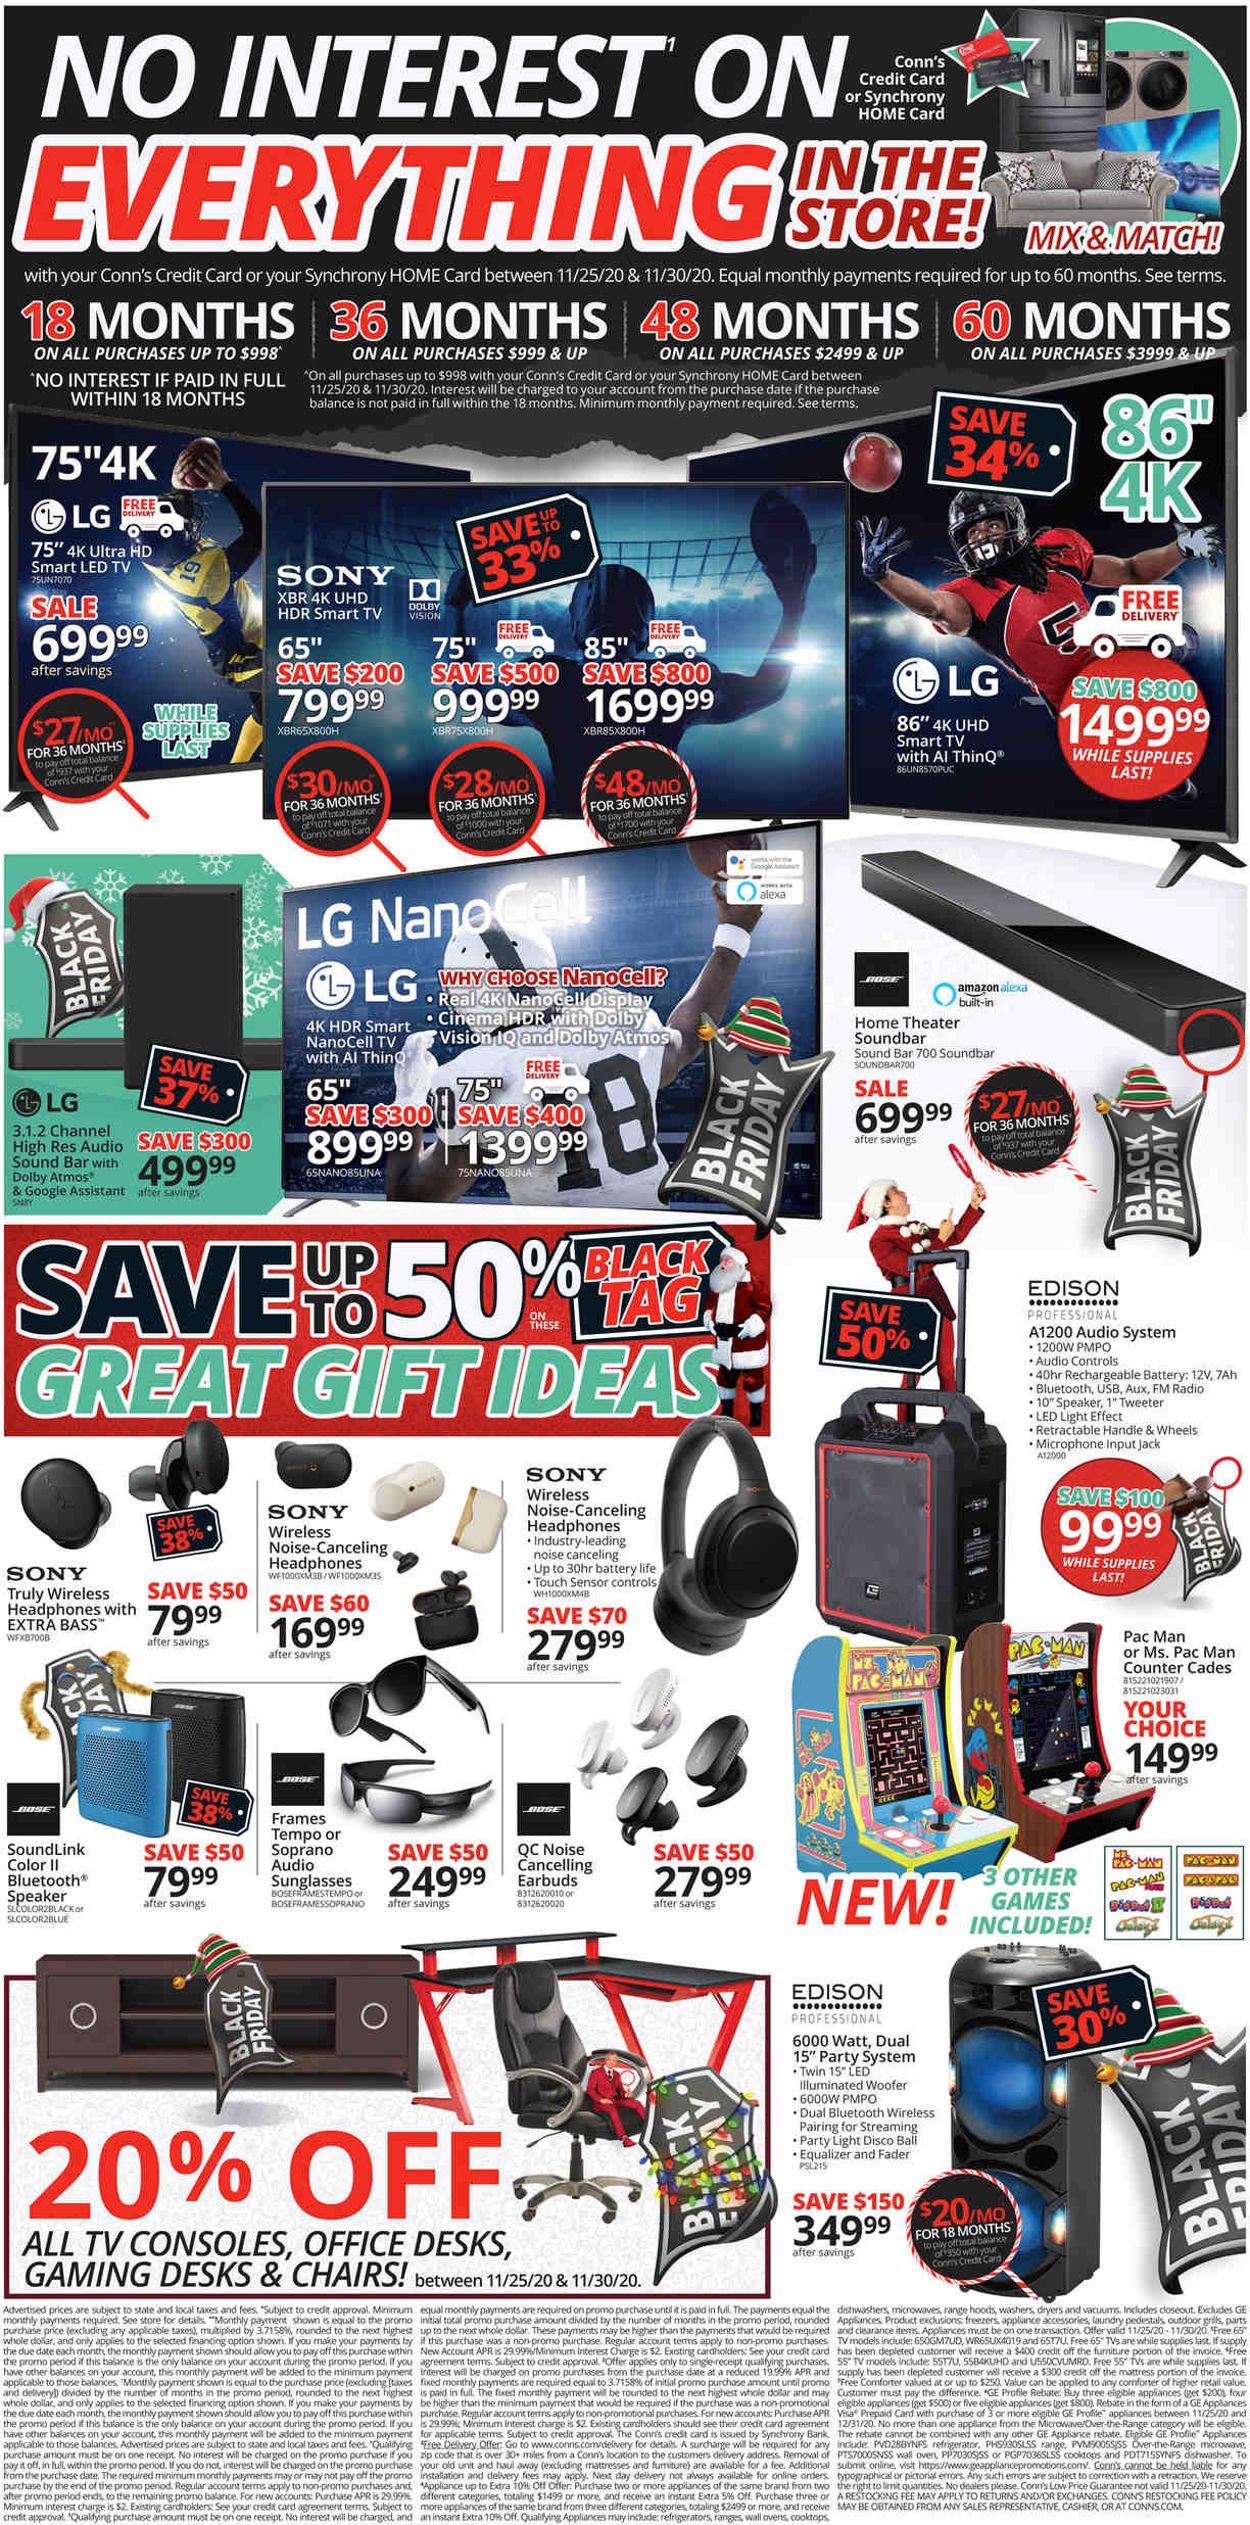 Conn's Home Plus Black Friday 2020 Weekly Ad Circular - valid 11/25-11/30/2020 (Page 3)